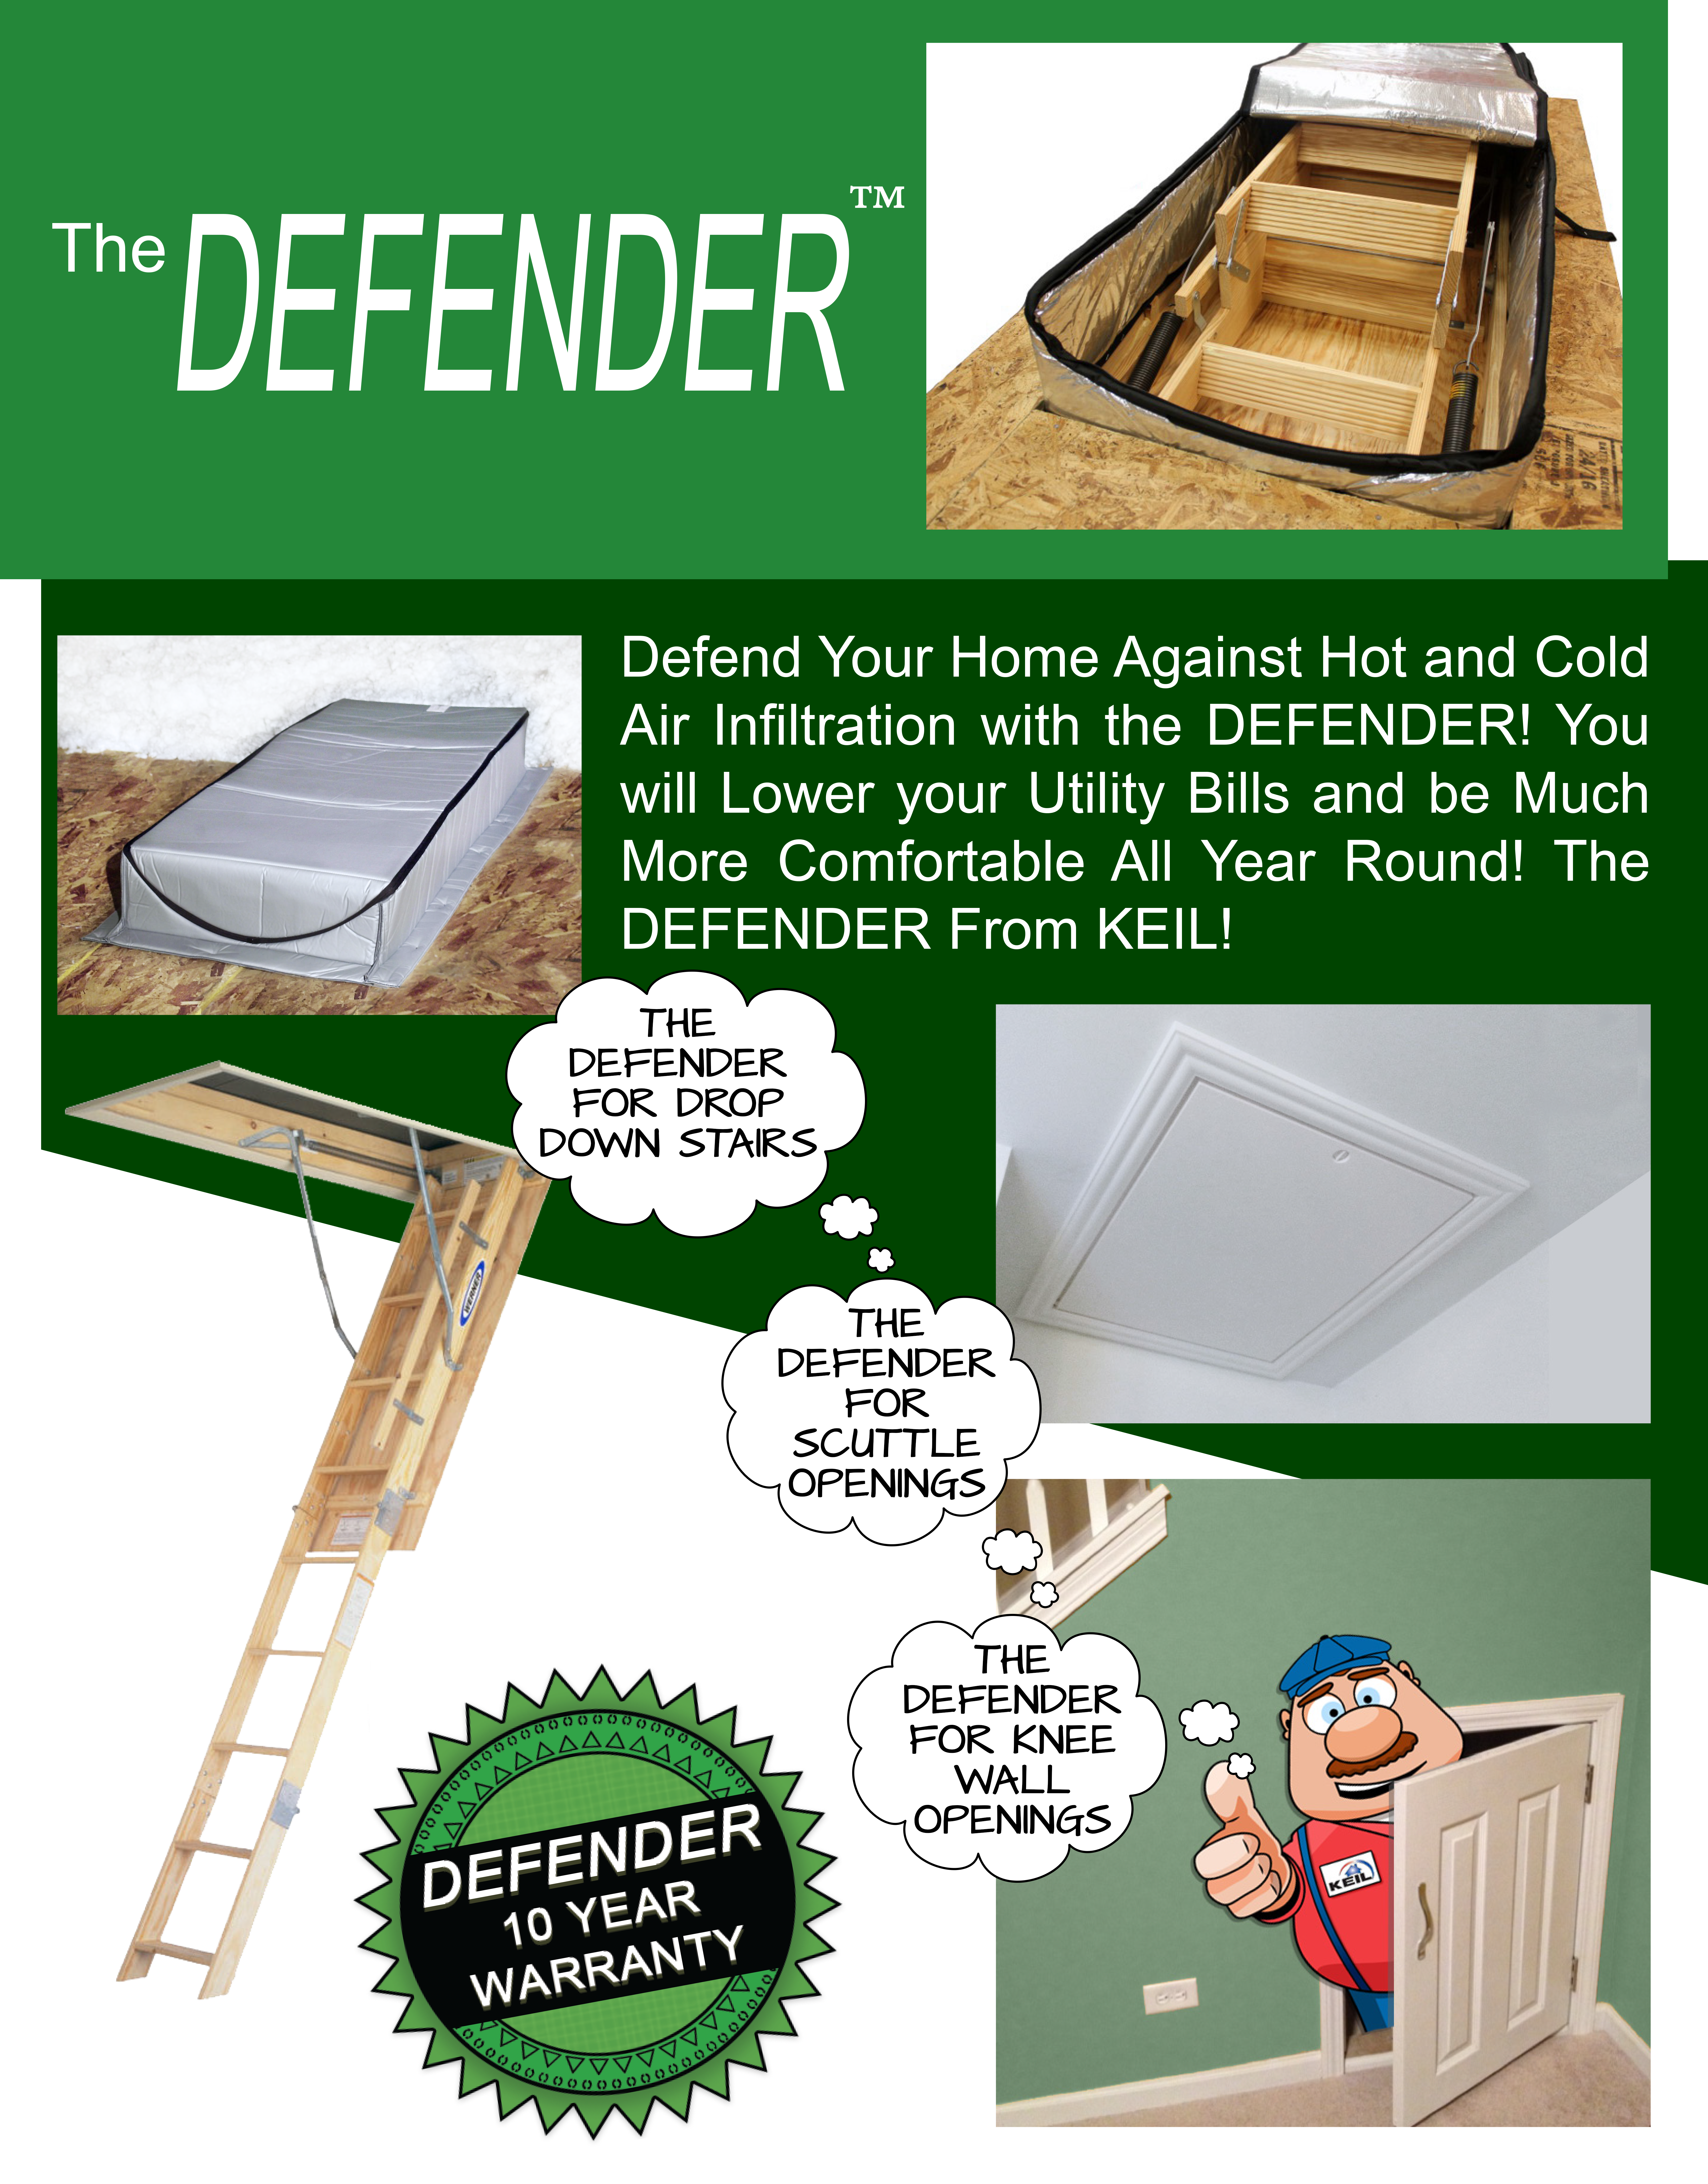 Defend your home against hot and cold air infiltration with the Defender!